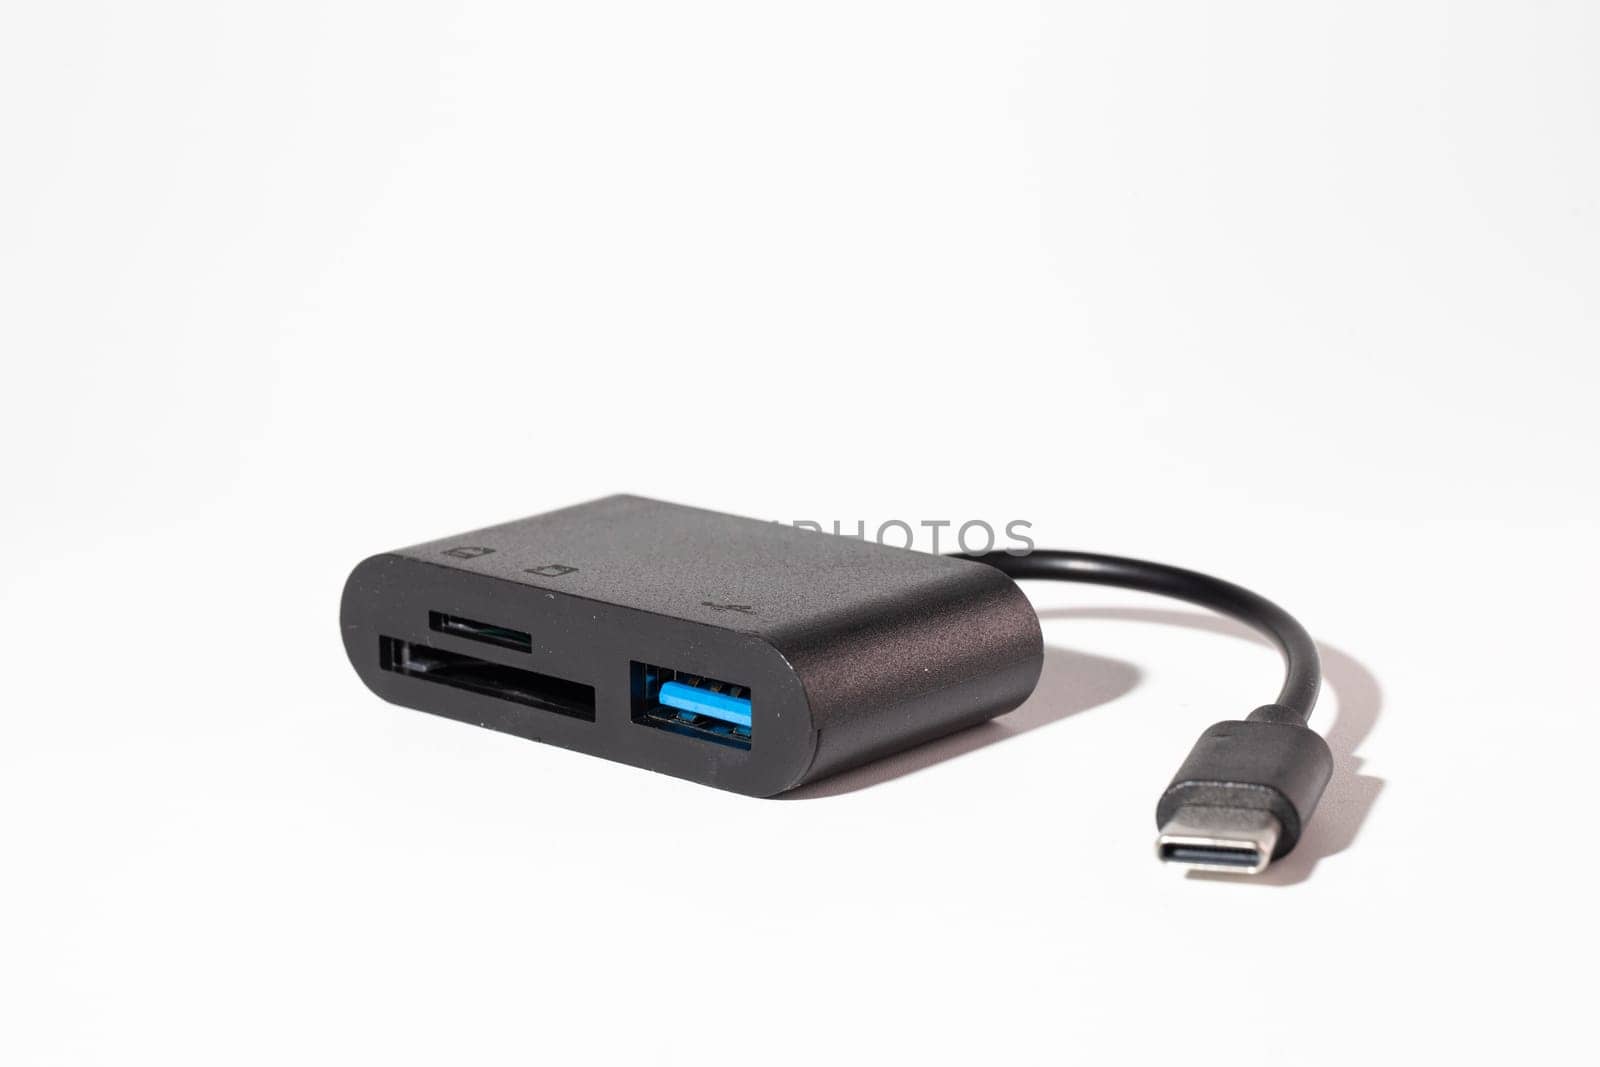 Black USB Type-C 3.1 Card Reader Adapter With Cable Isolated On White Background by Pukhovskiy